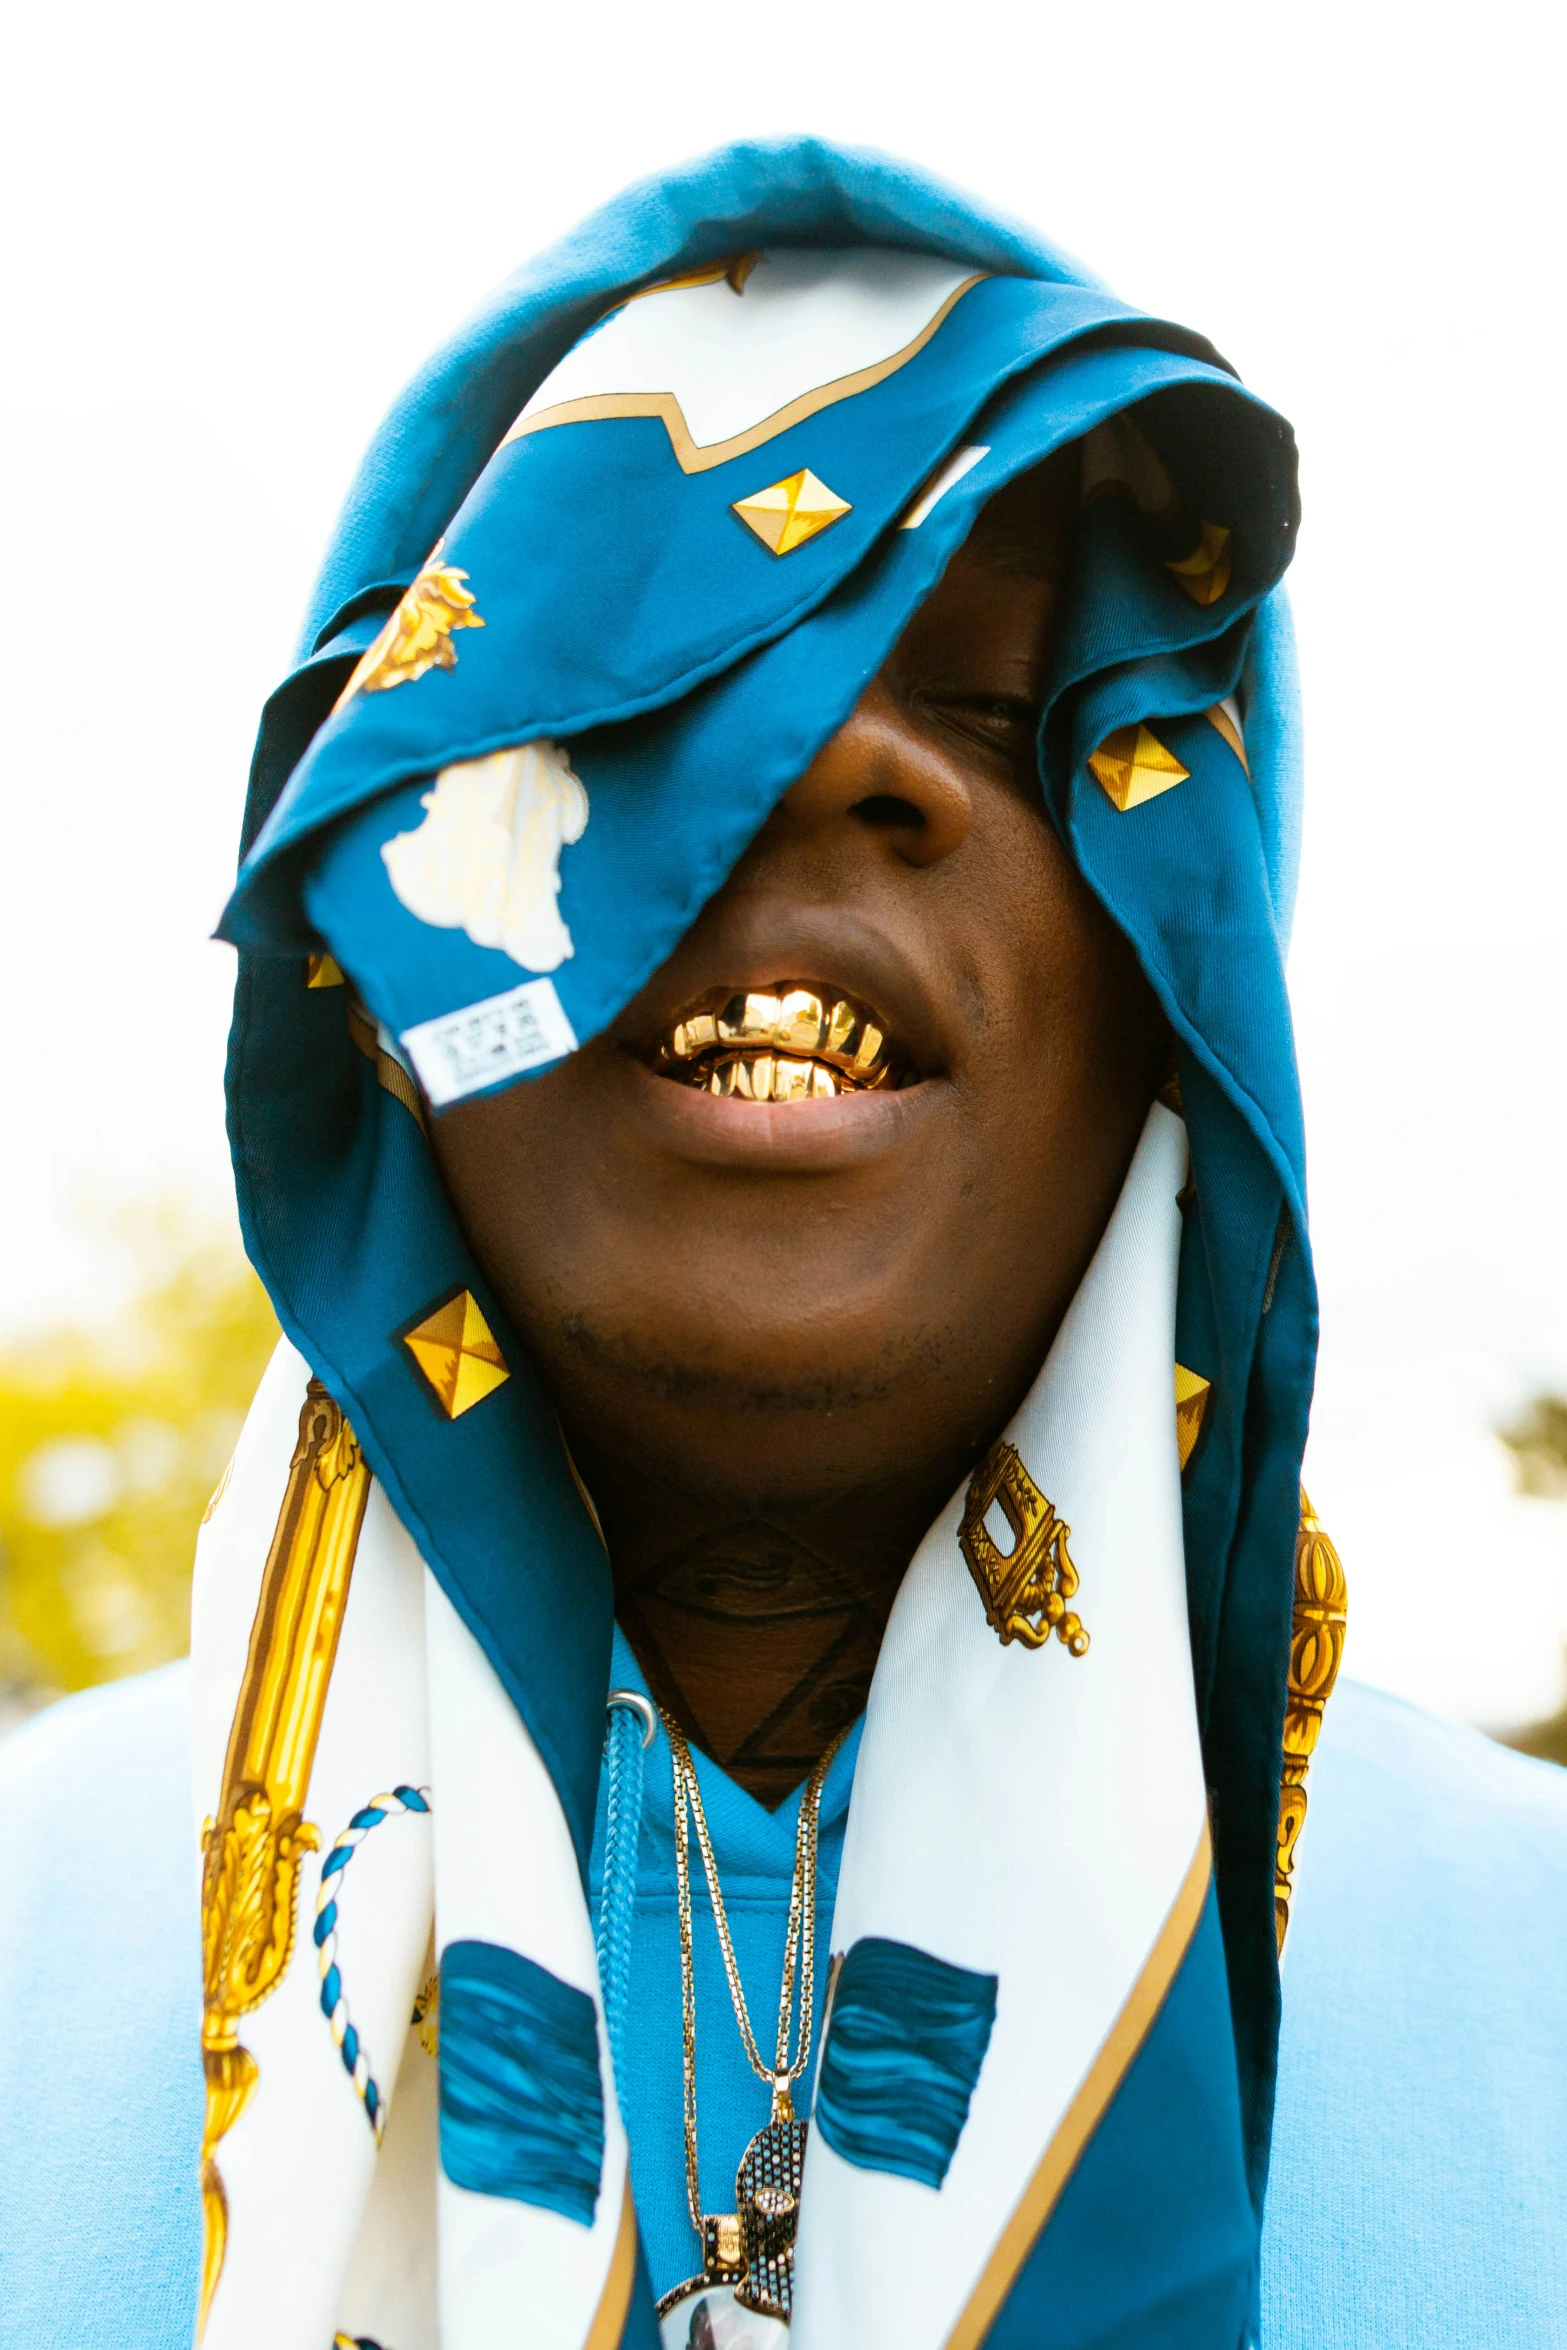 a man in a blue shirt wearing some gold chains